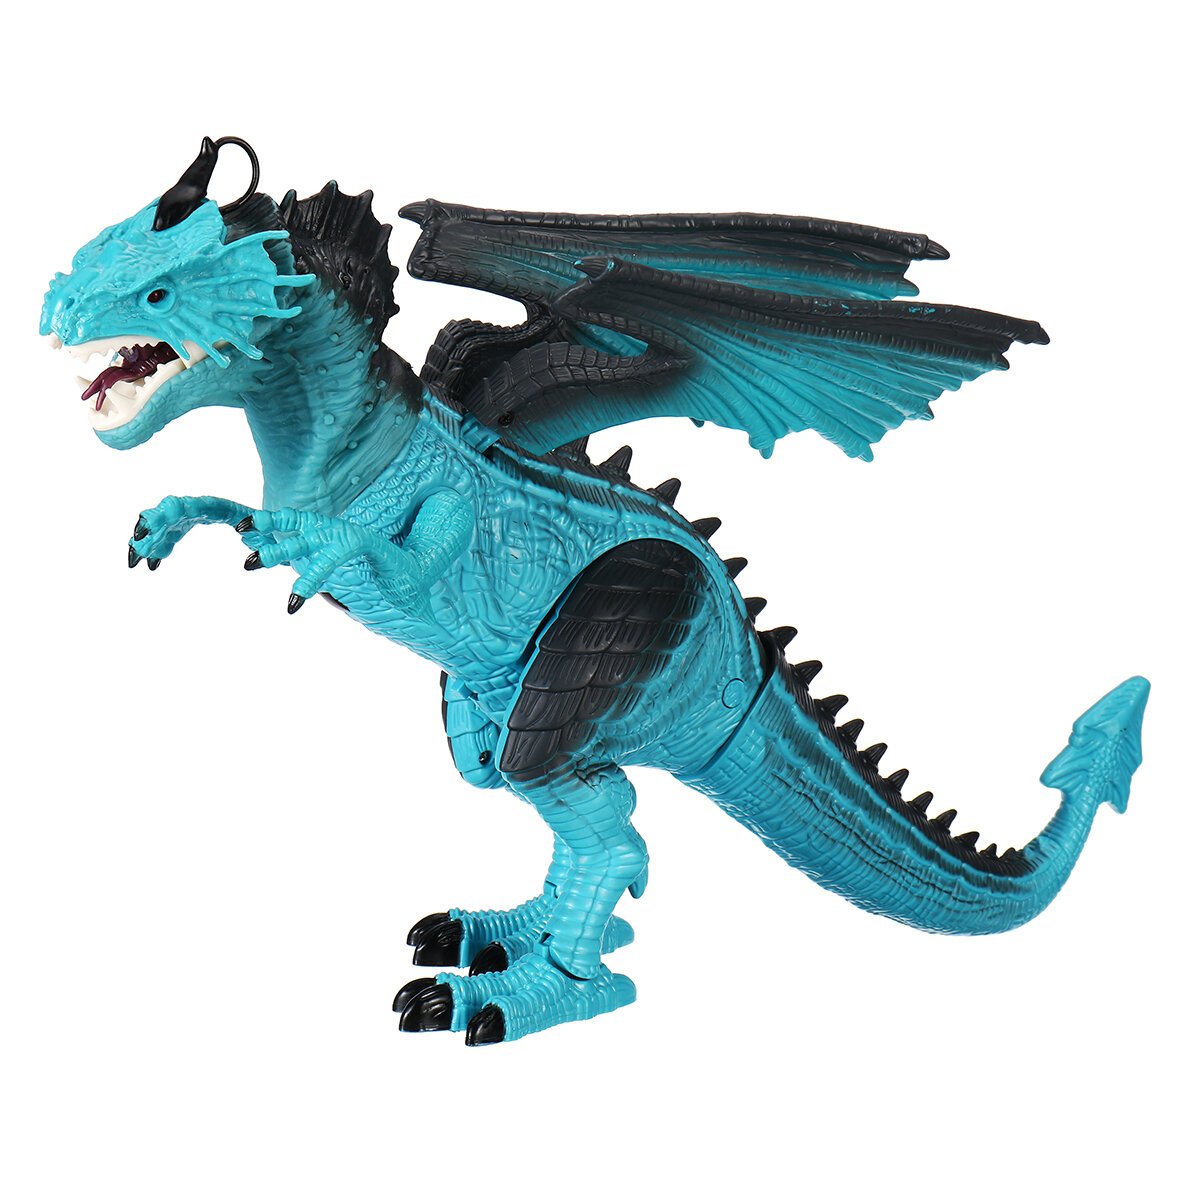 Remote Control 360 Rotate Spray Dinosaur with Sound LED Light and Simulate Flame Diecast Model Toy for Kids Gift